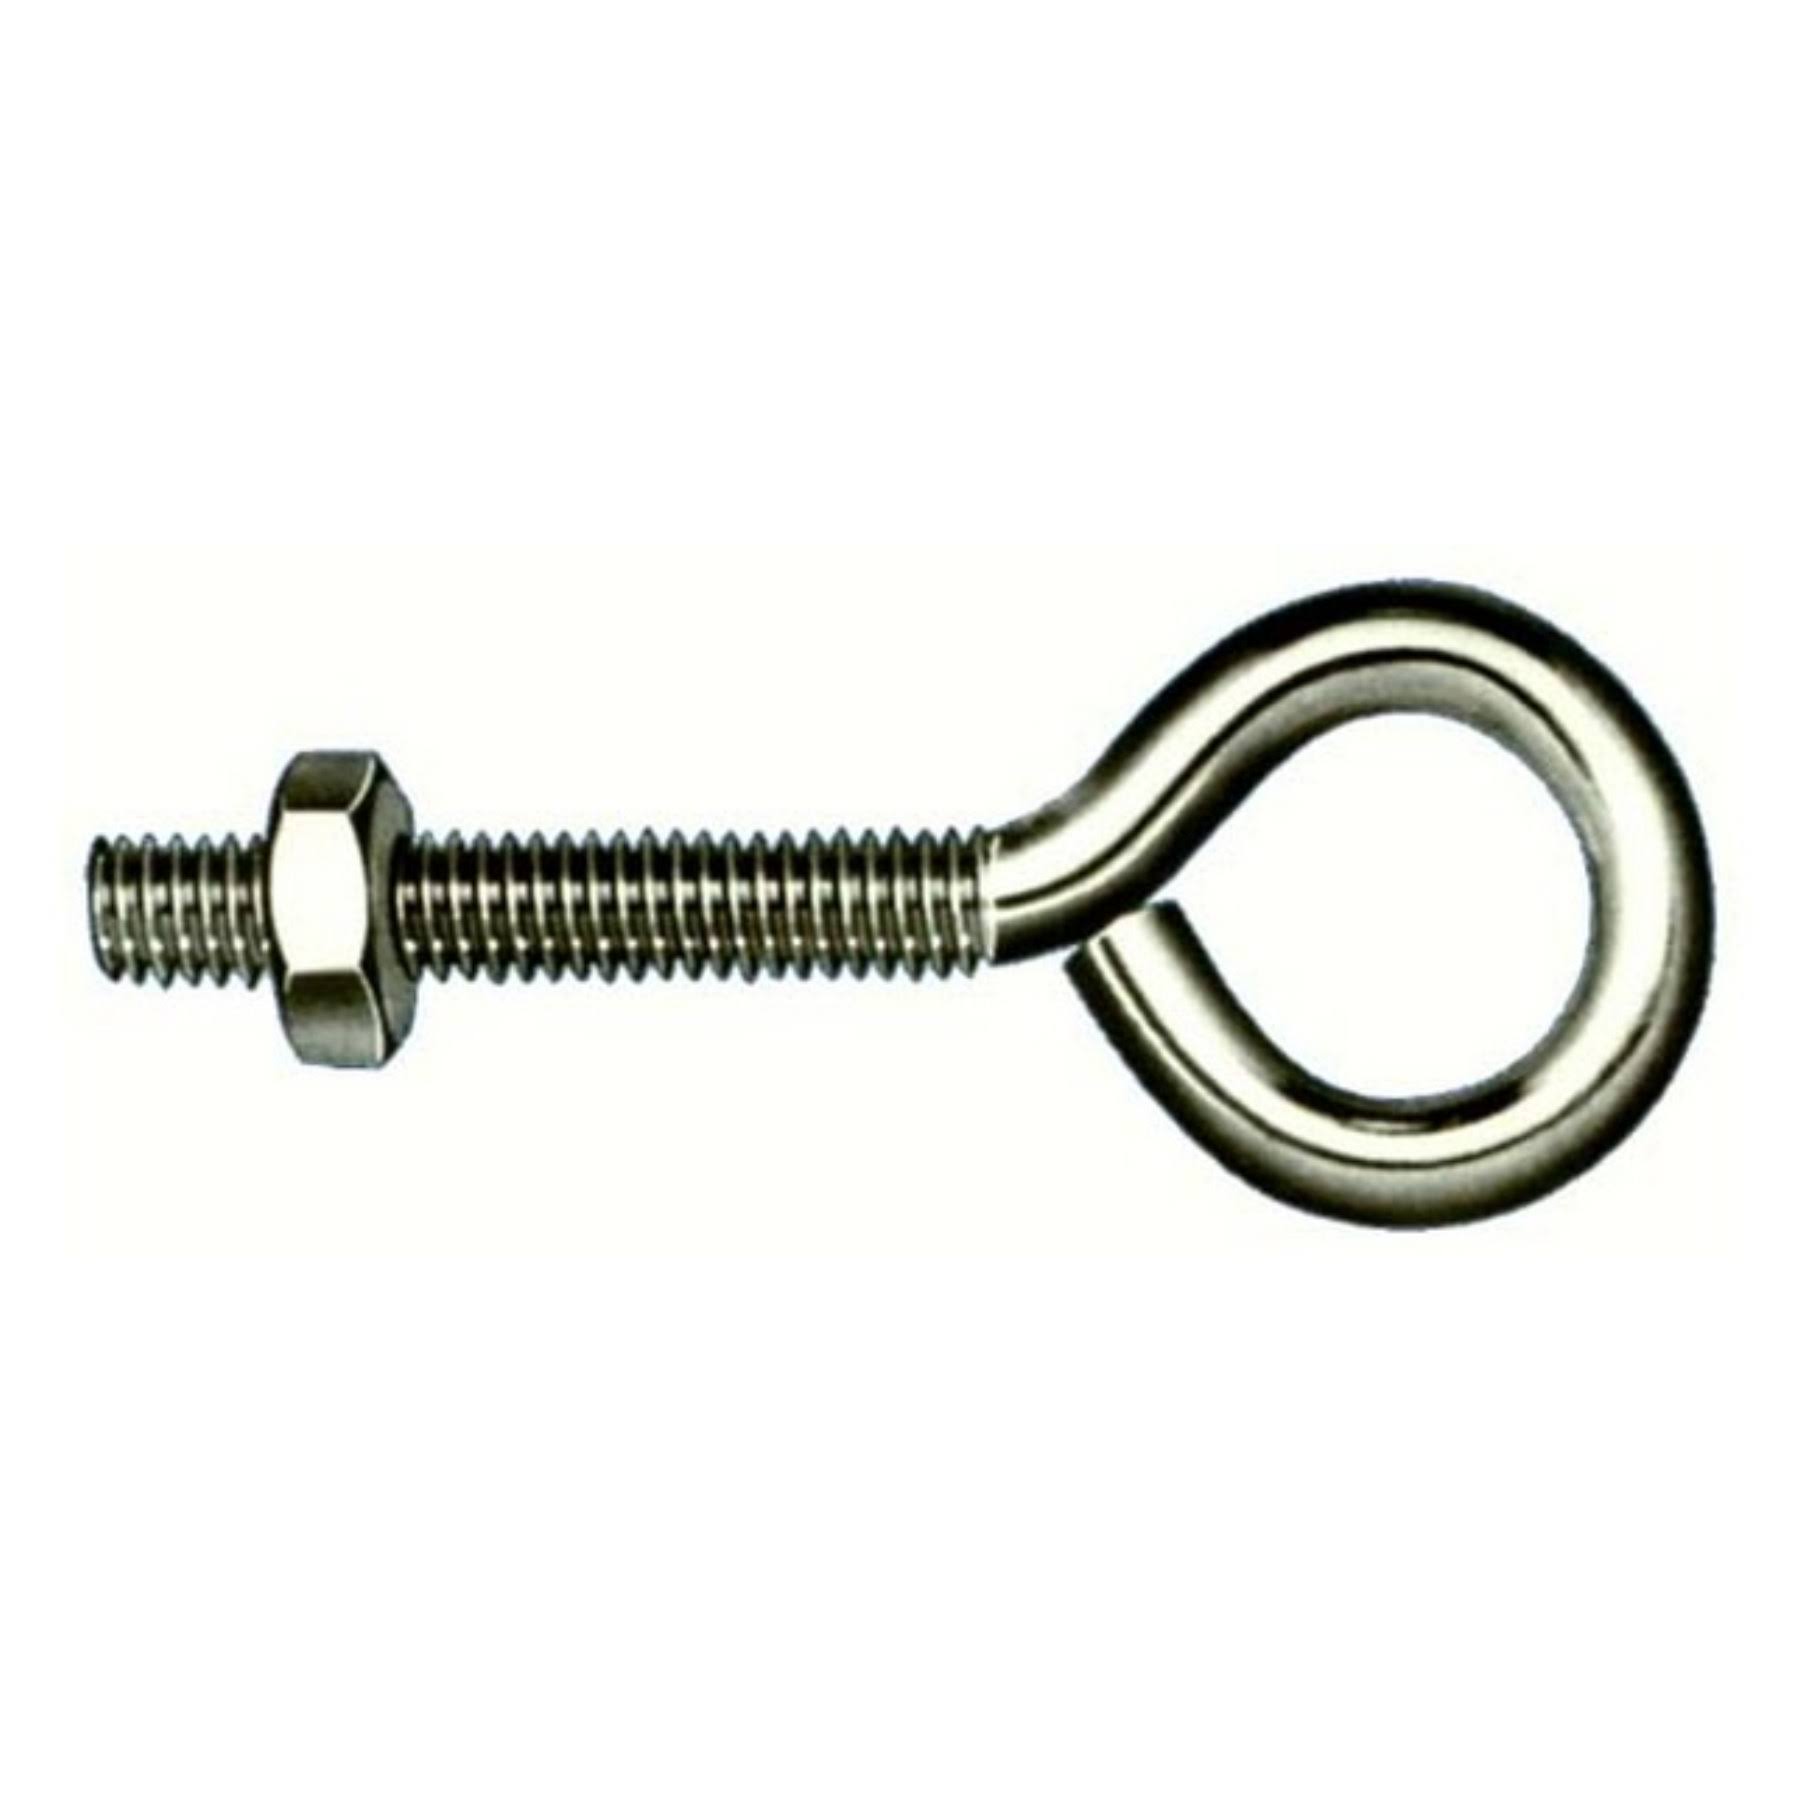 Hindley 10 Count .38in. x 8in. Stainless Steel Eye Bolts with Nuts 44319 - Pack of 10